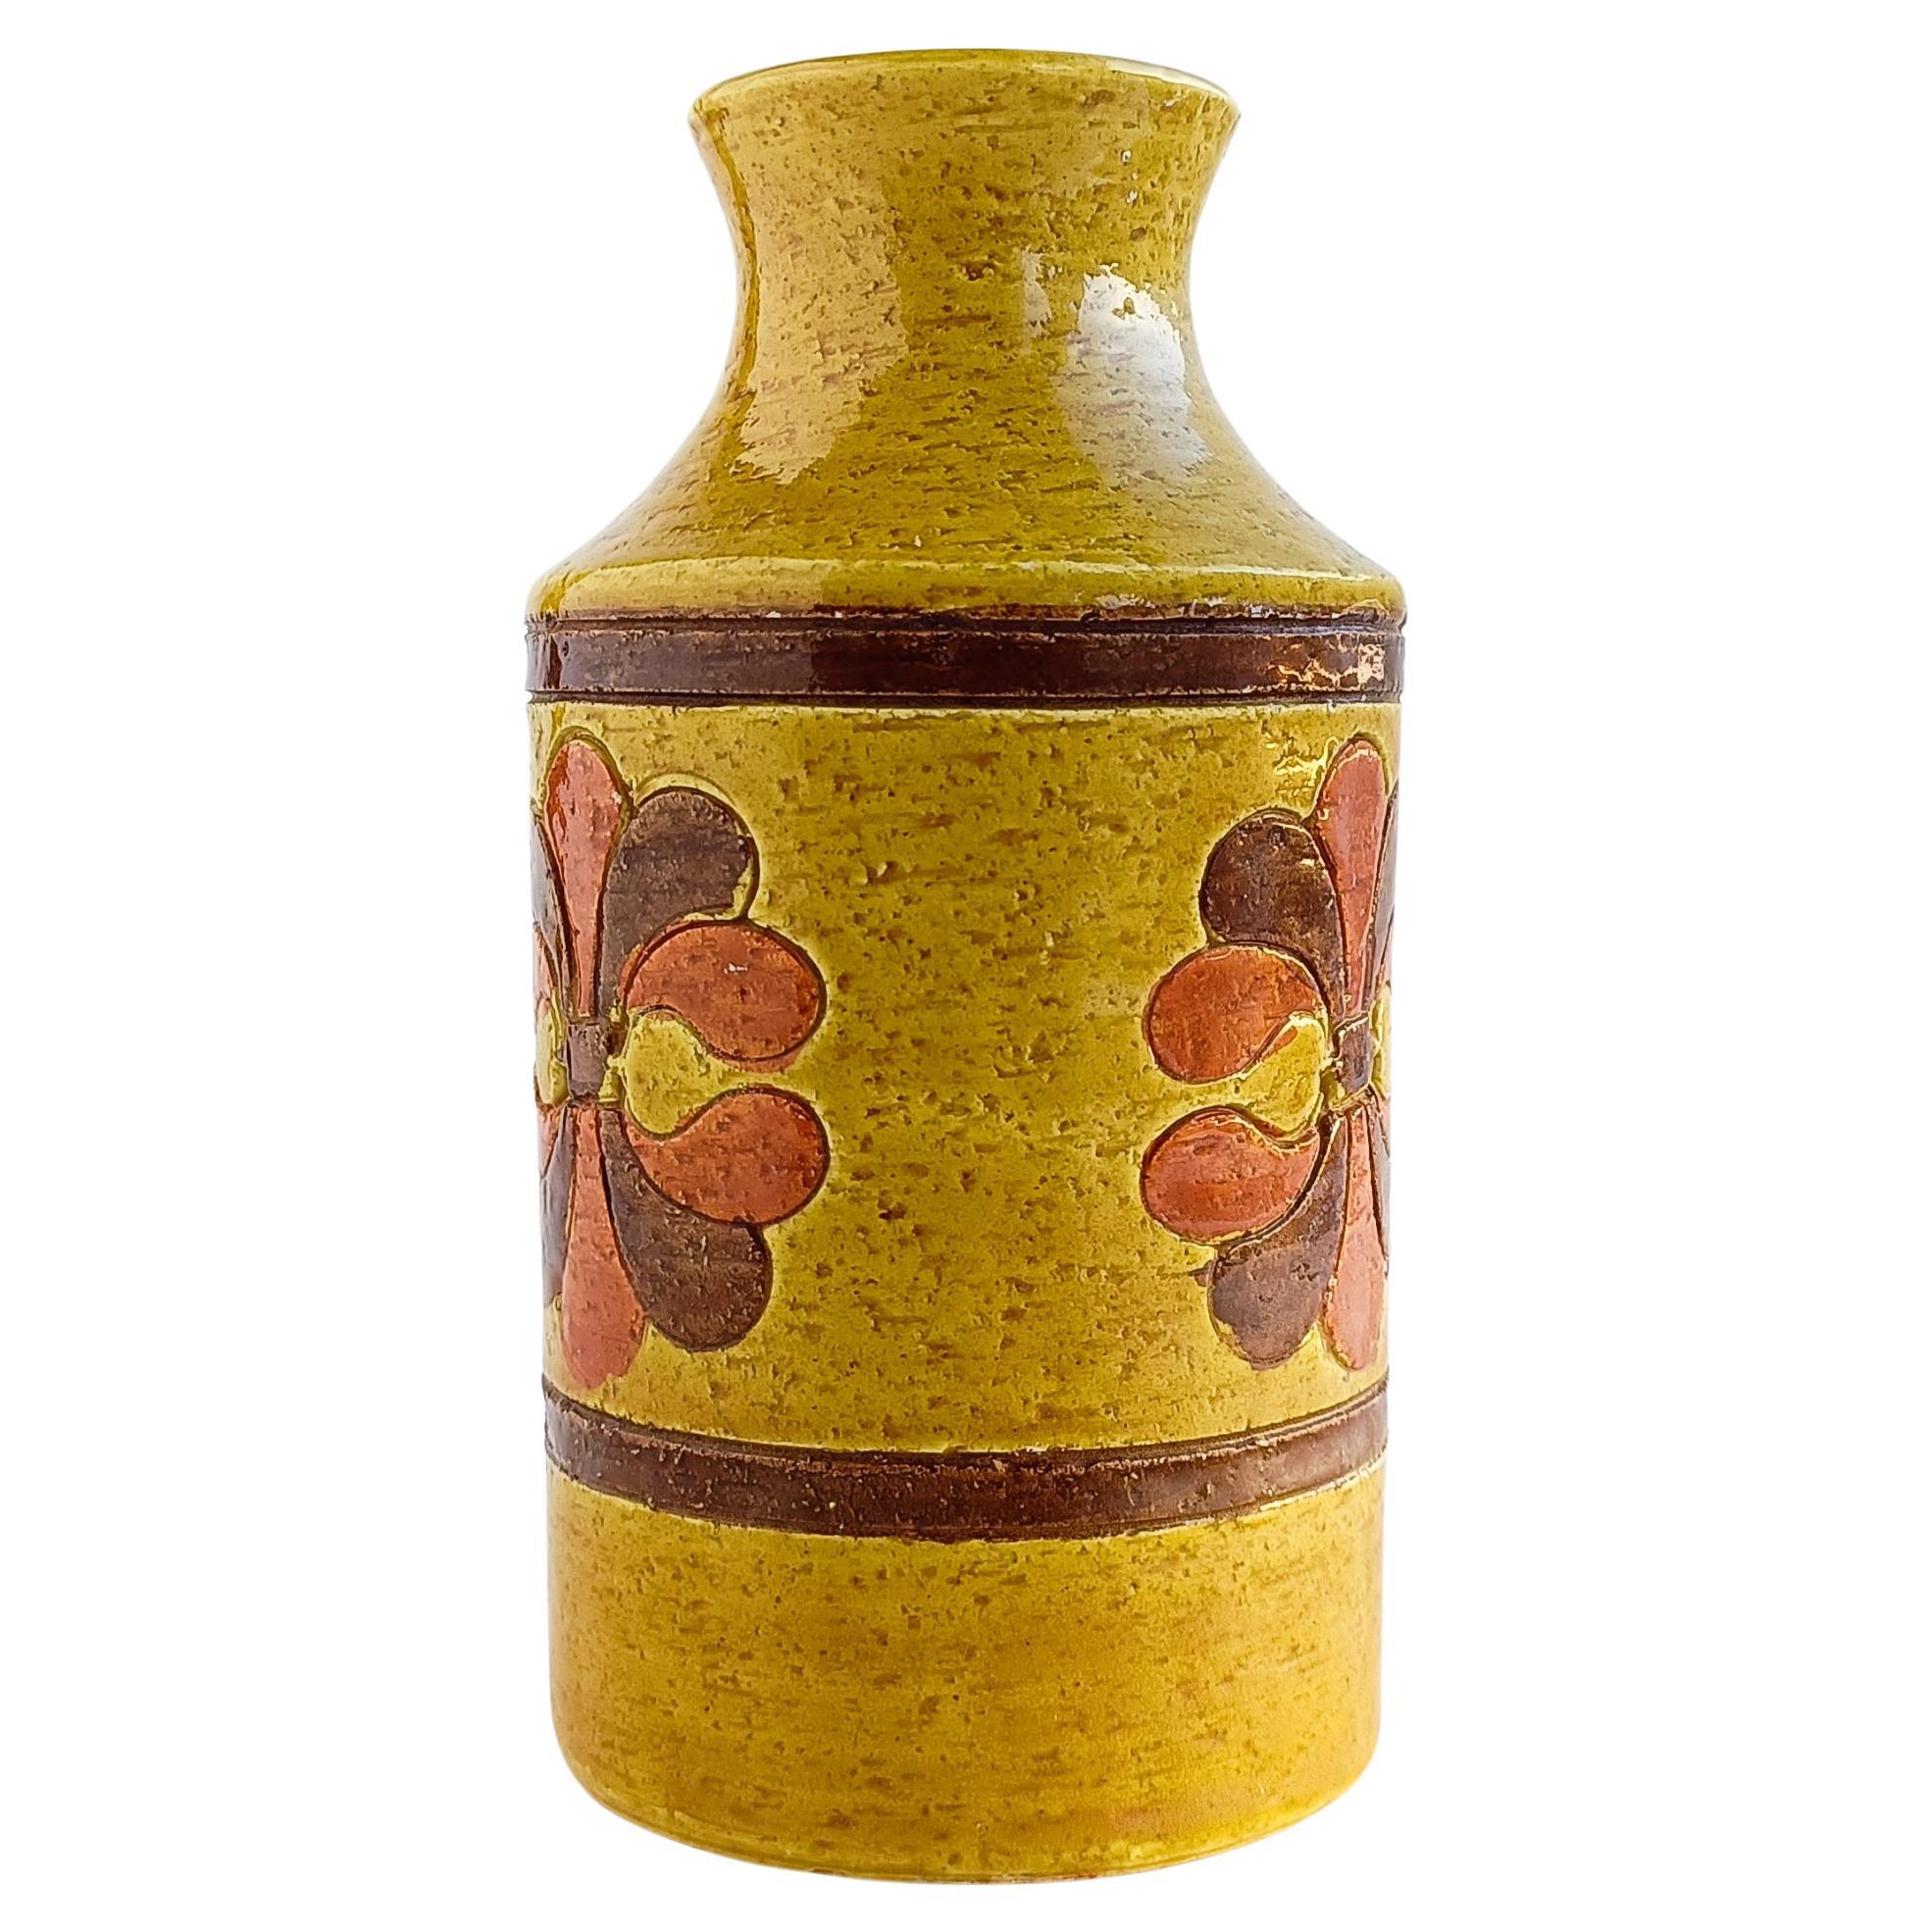 Aldo Londi was a prominent Italian ceramicist known for his work at Bitossi Ceramiche. Bitossi ceramics are highly regarded for their distinctive designs and craftsmanship, making them sought after by collectors of mid-century Italian pottery.

This